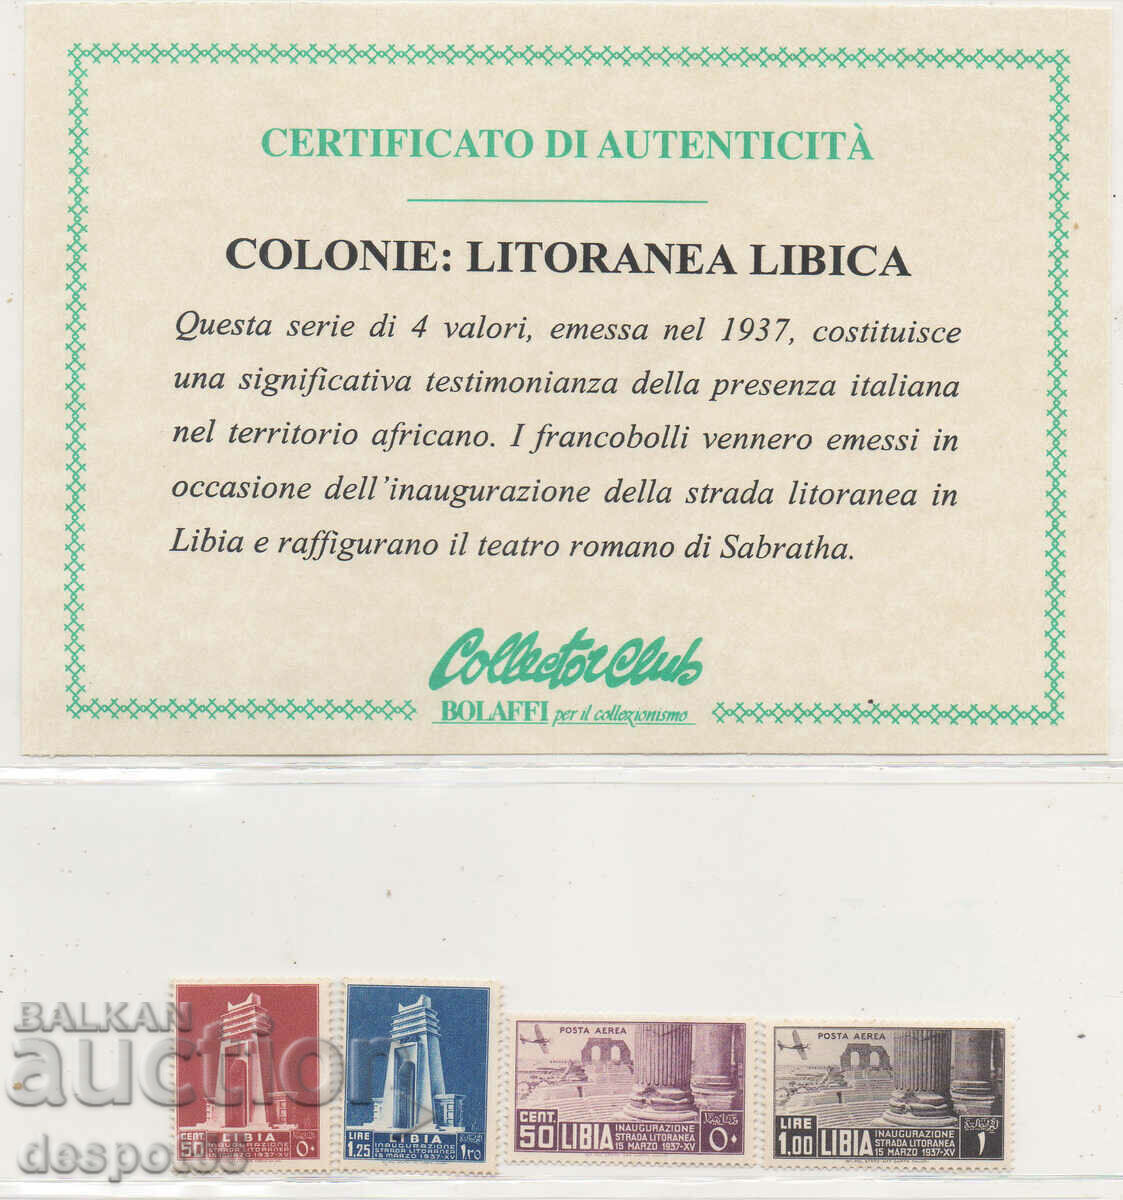 1937. Italy-Libya. Discovery of the Coastal Path. Certificate